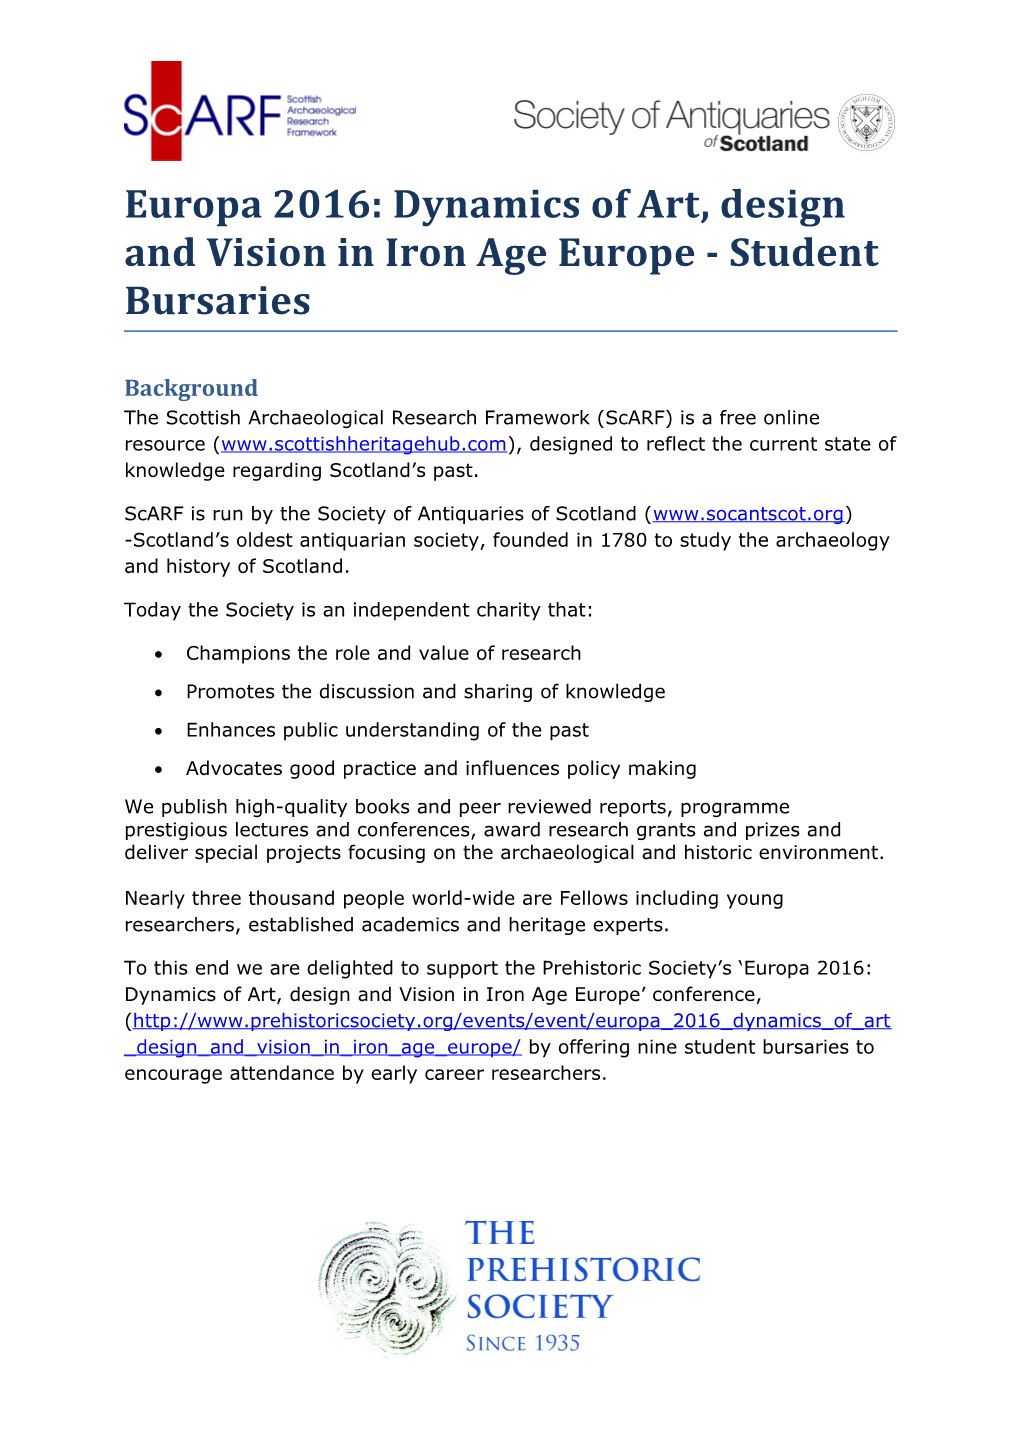 Europa 2016: Dynamics of Art, Design and Vision in Iron Age Europe - Student Bursaries